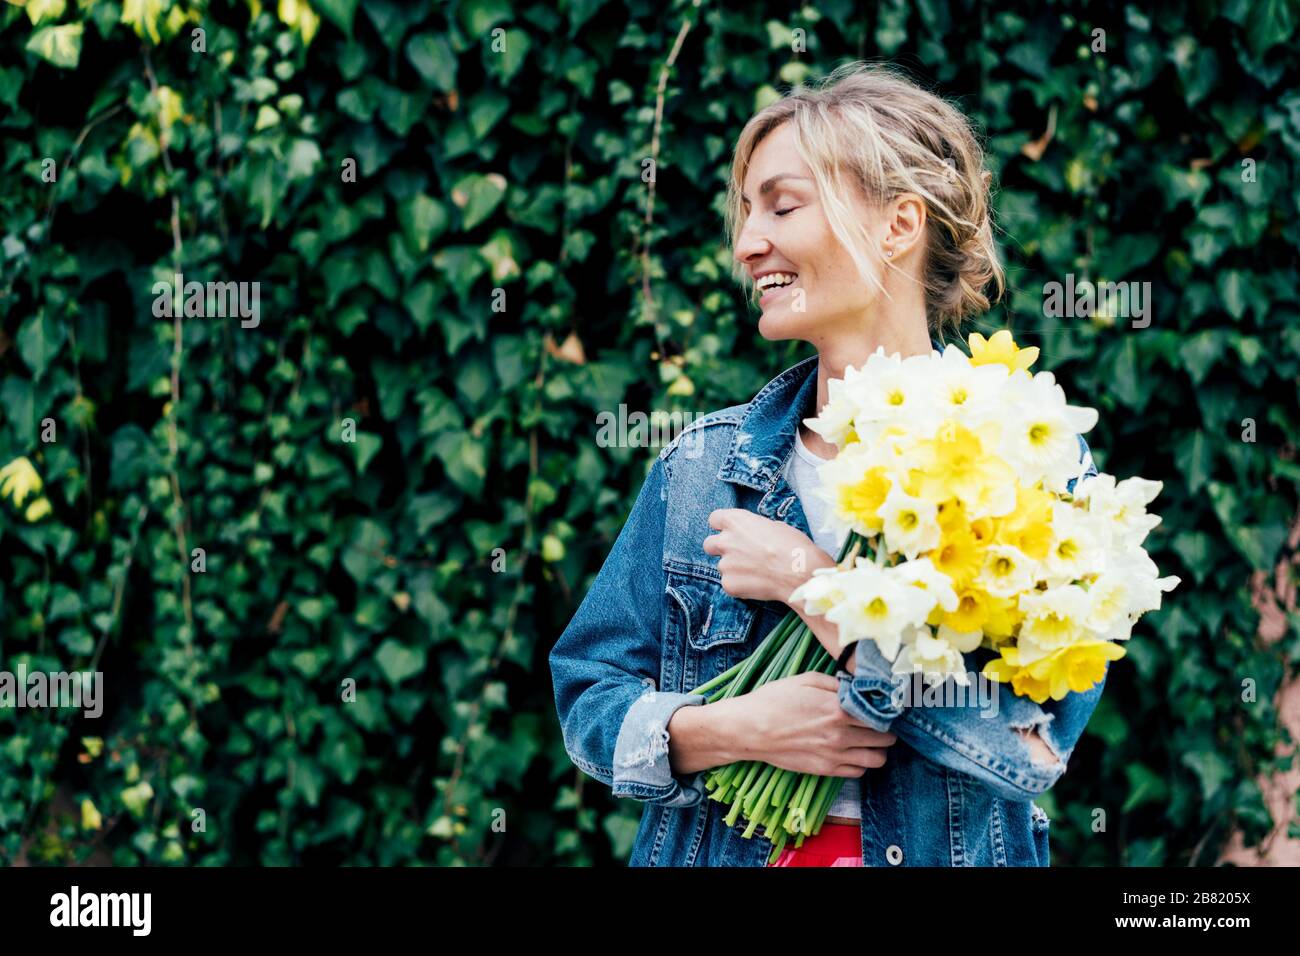 woman presses a bouquet of daffodils Stock Photo